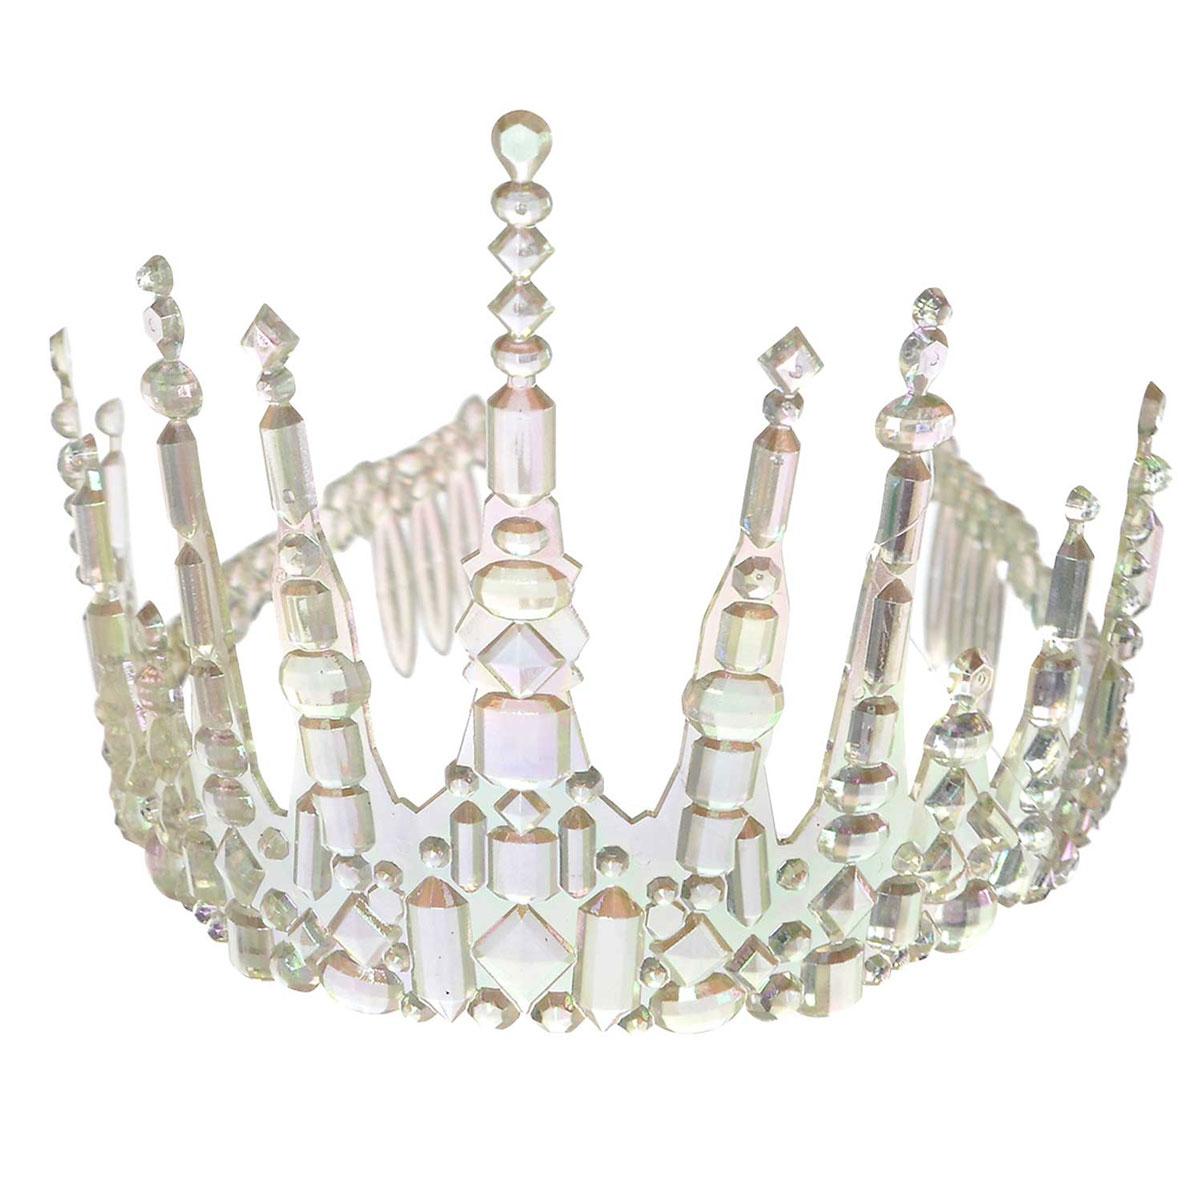 Crown Icicle Tiara for Now Queen costumes and more by Amscan 845989 available here at Karnival Costumes online party shop